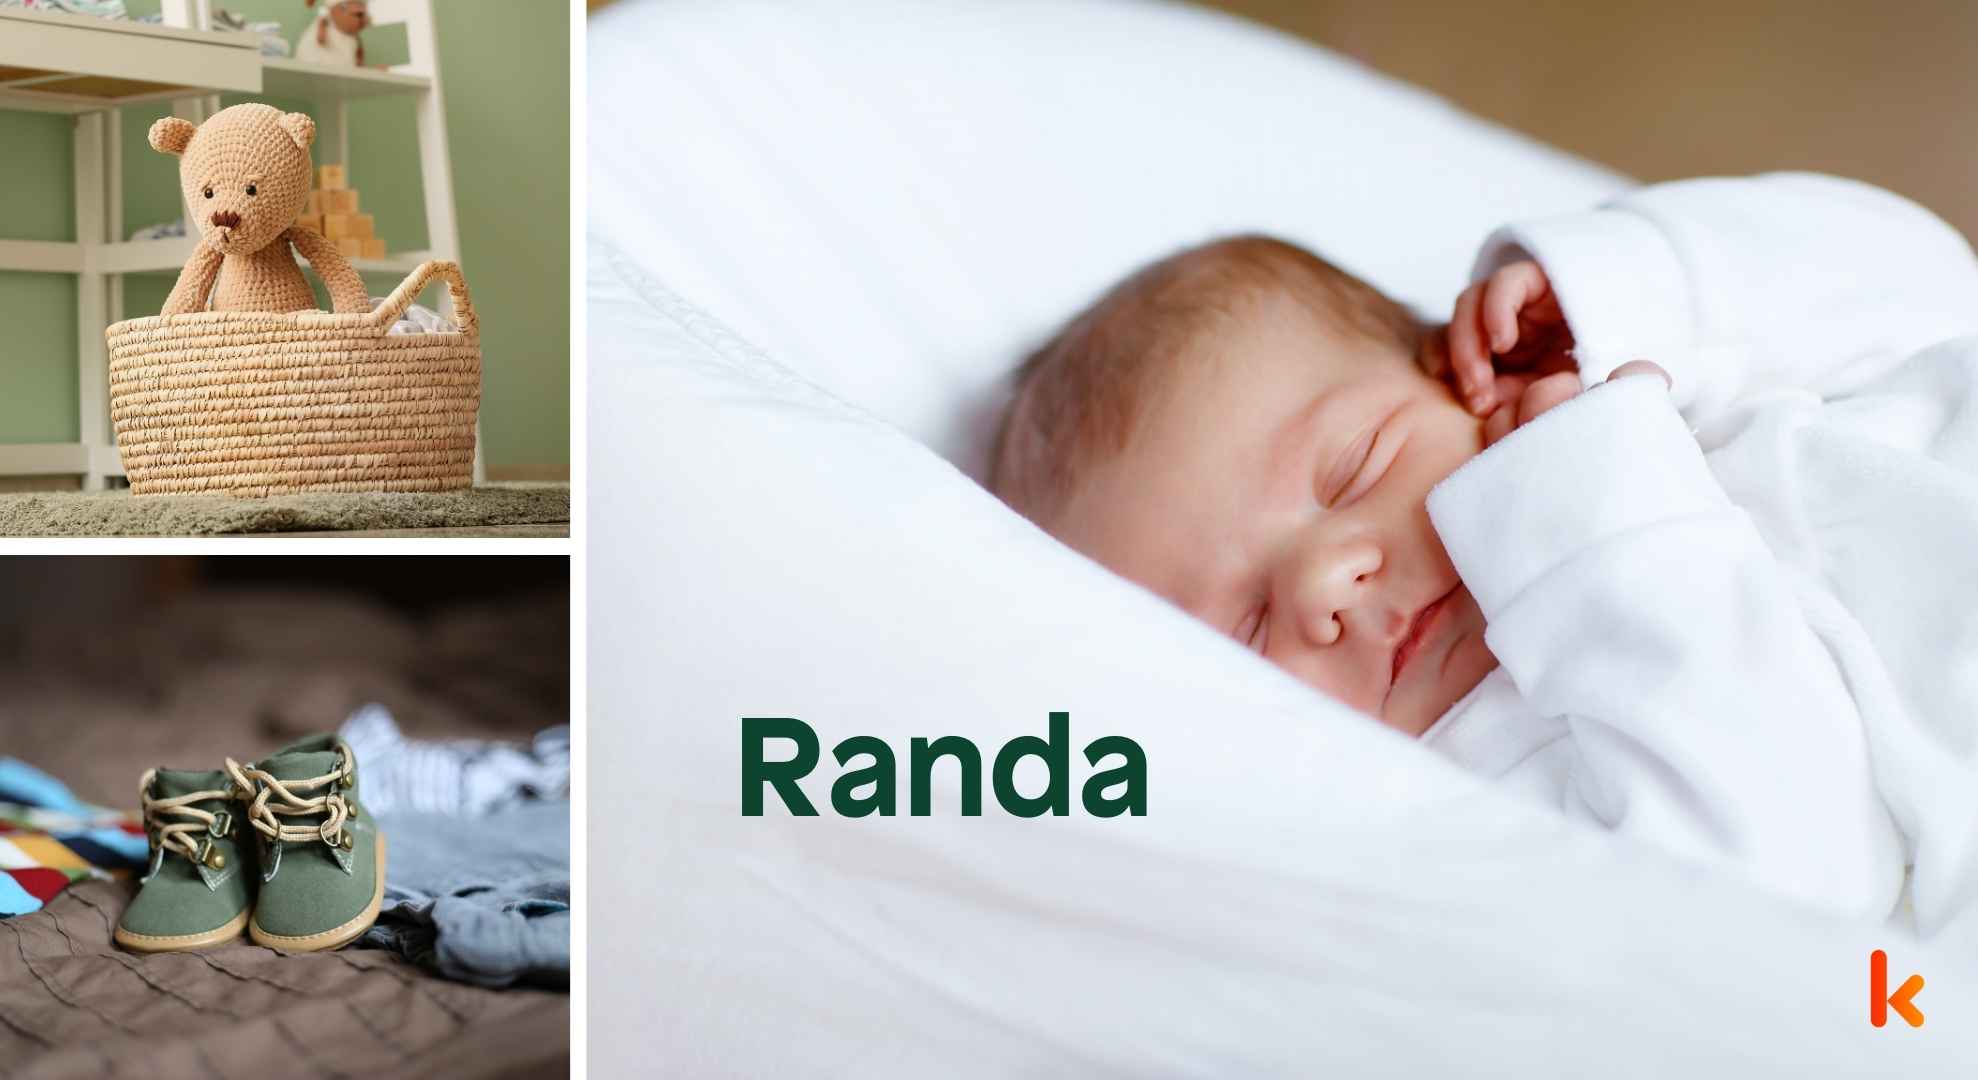 Meaning of the name Randa